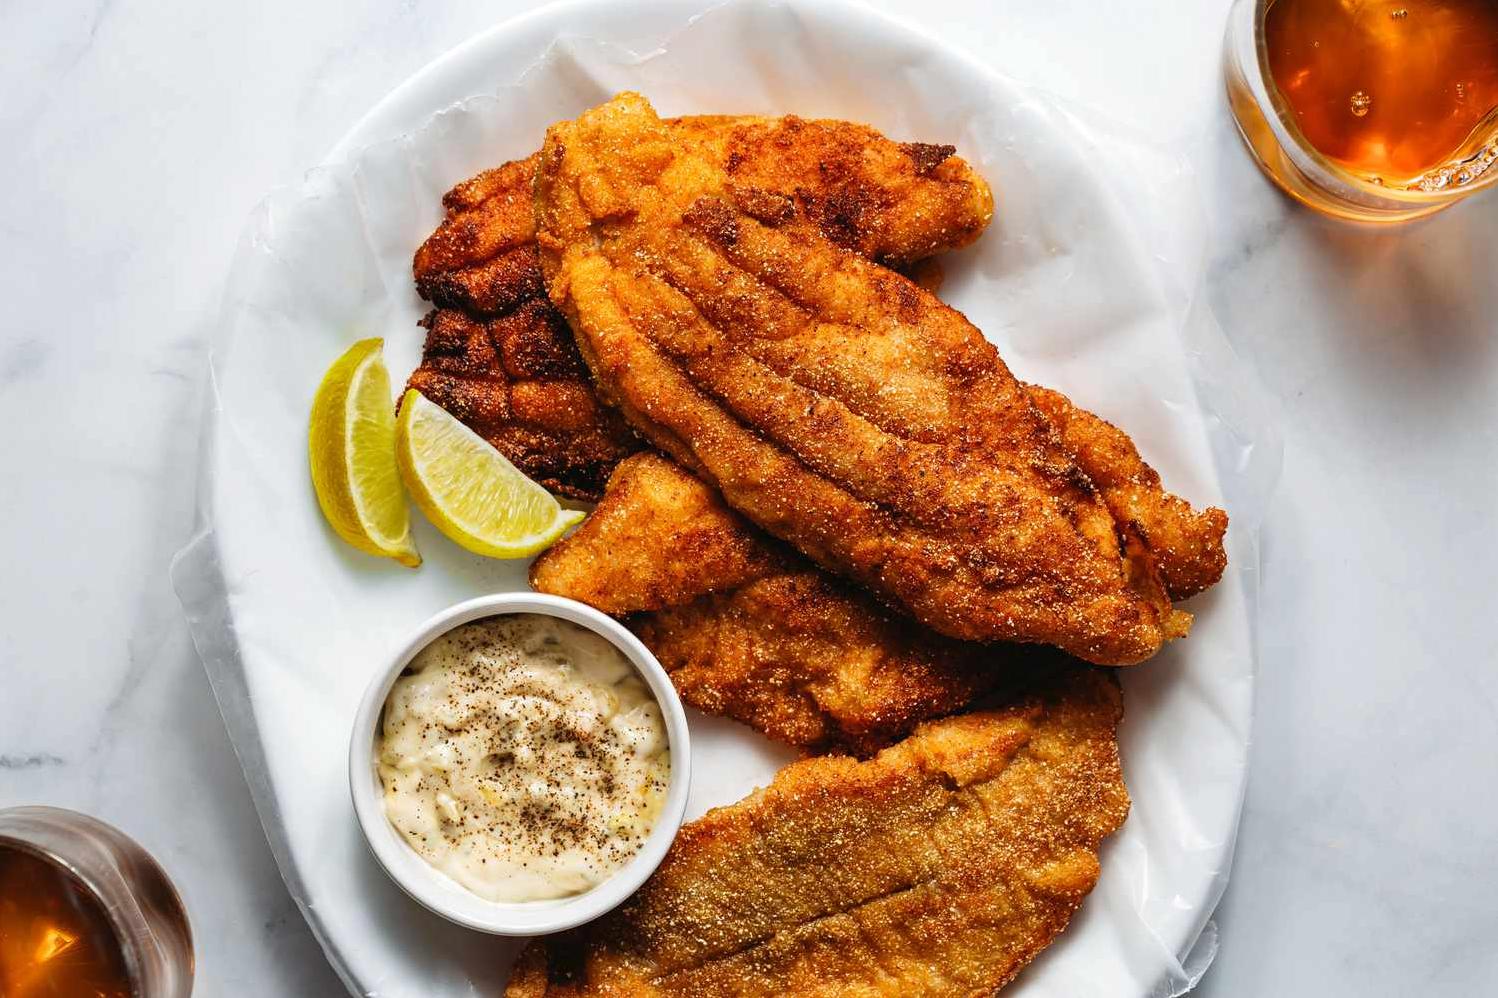  Get ready to dig into some finger-licking good catfish.